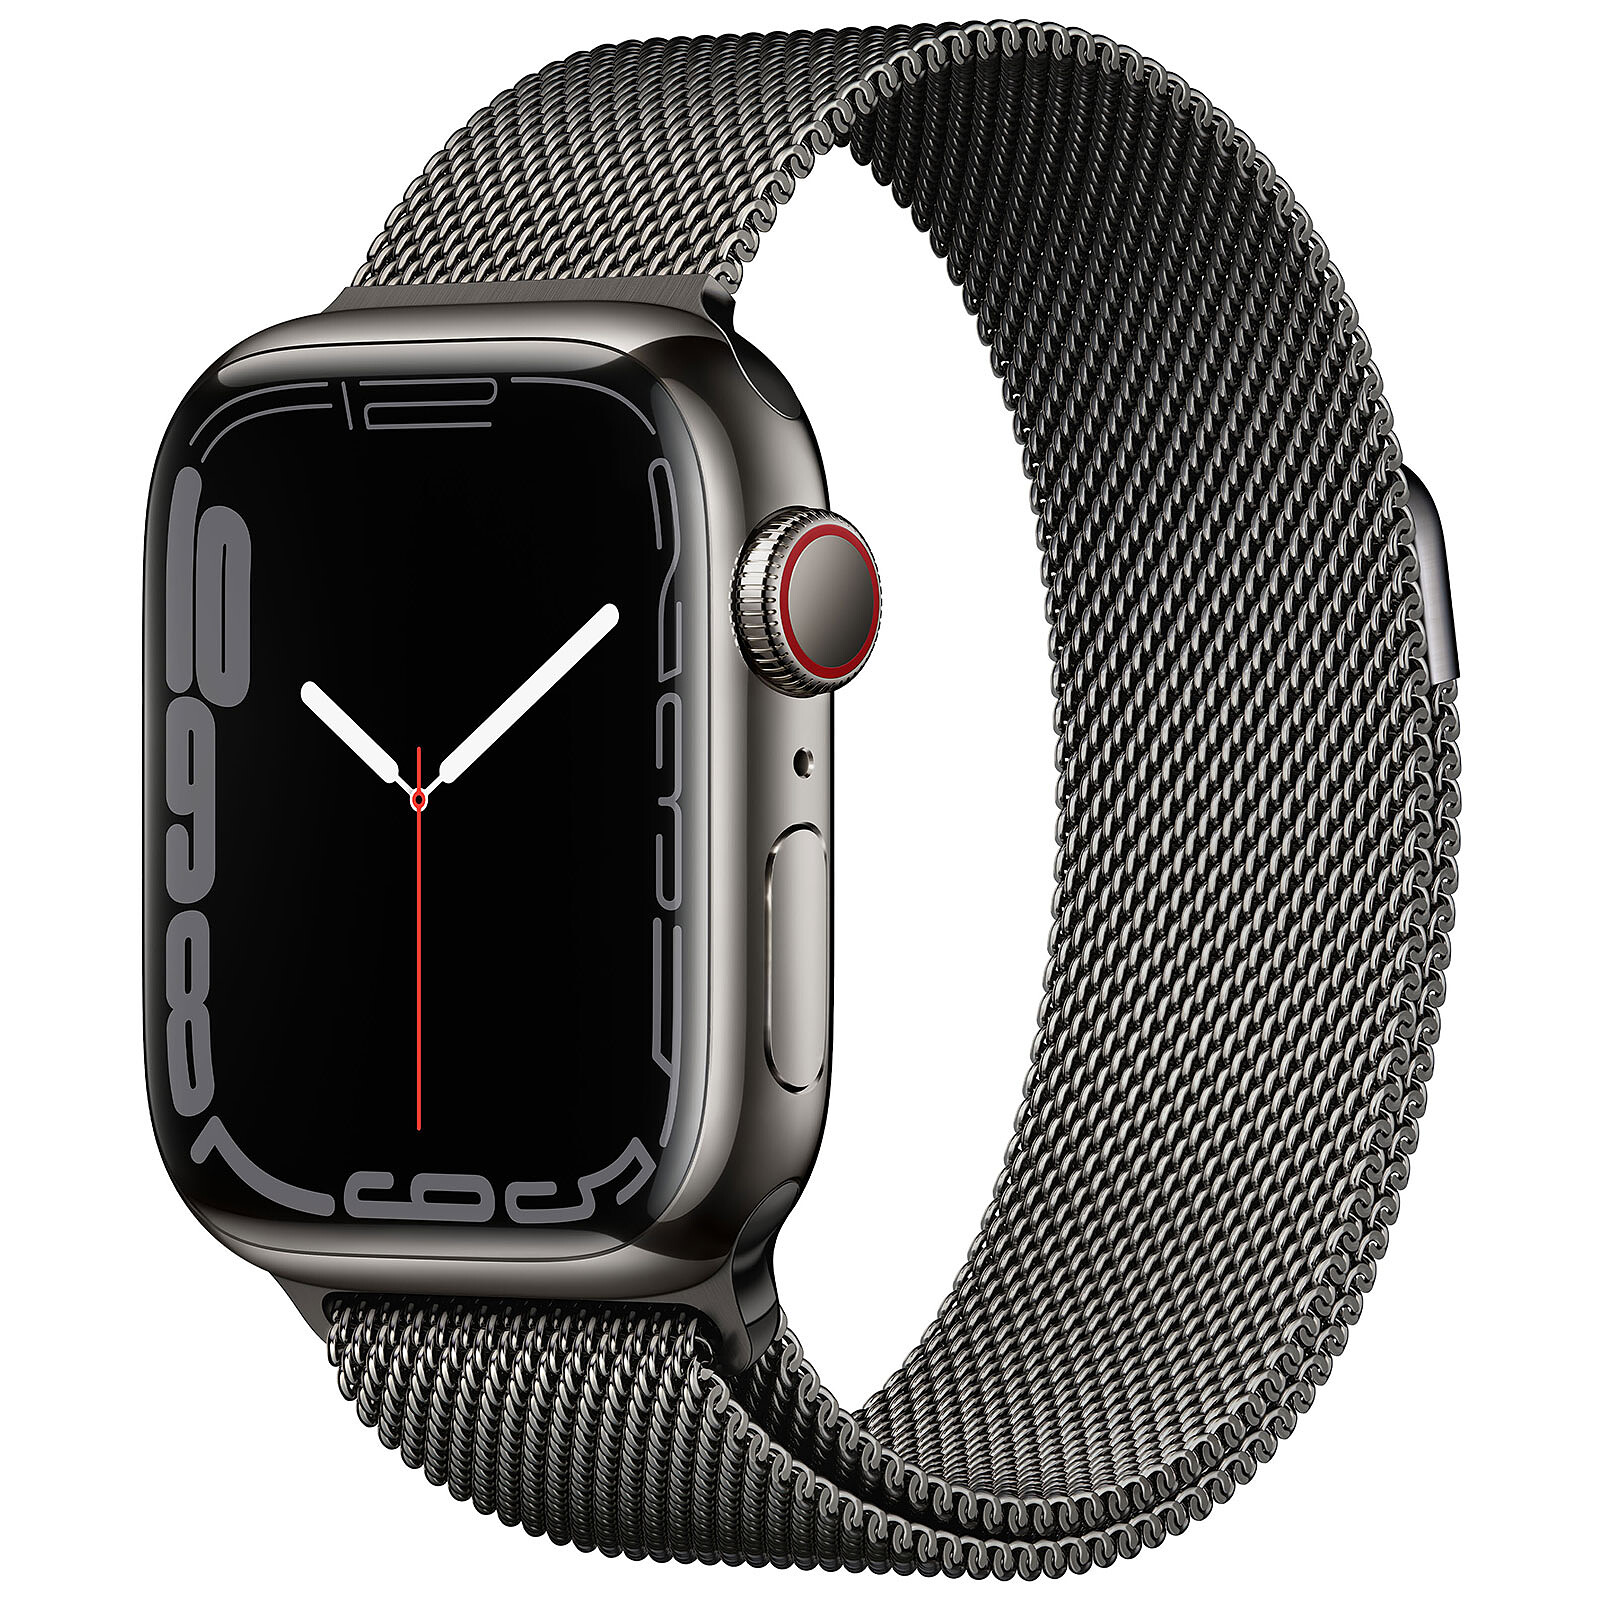 Apple Watch Series 7 GPS + Cellular Graphite Stainless Graphite 